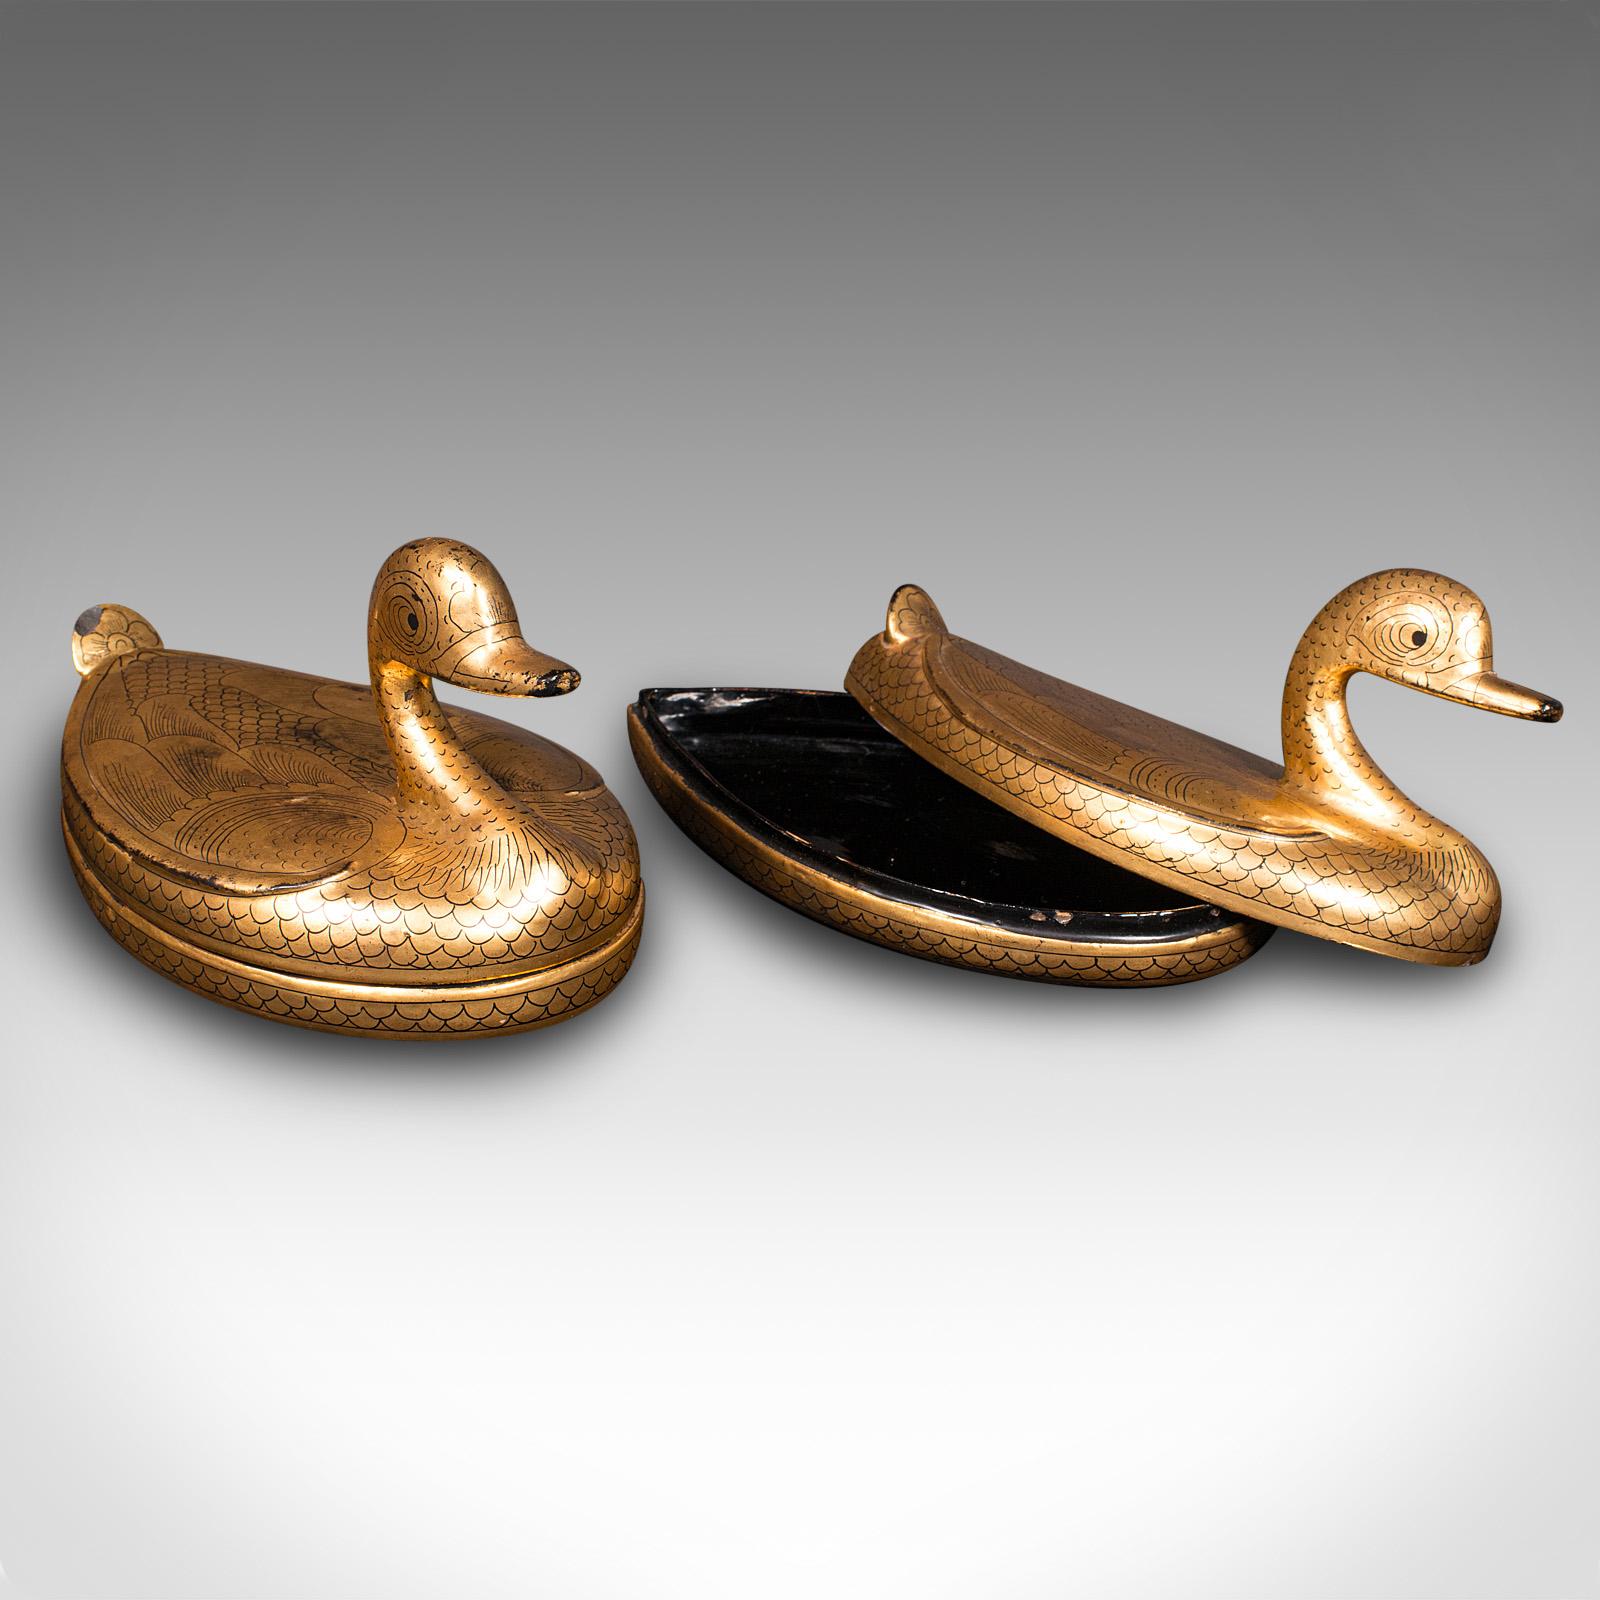 This is a pair of vintage duck form pots. An Oriental, lacquer and gilt decorative trinket box, dating to the Art Deco period, circa 1940.

Of delightful duck form, with small trays for keeping trinkets
Displaying a desirable aged patina and in good